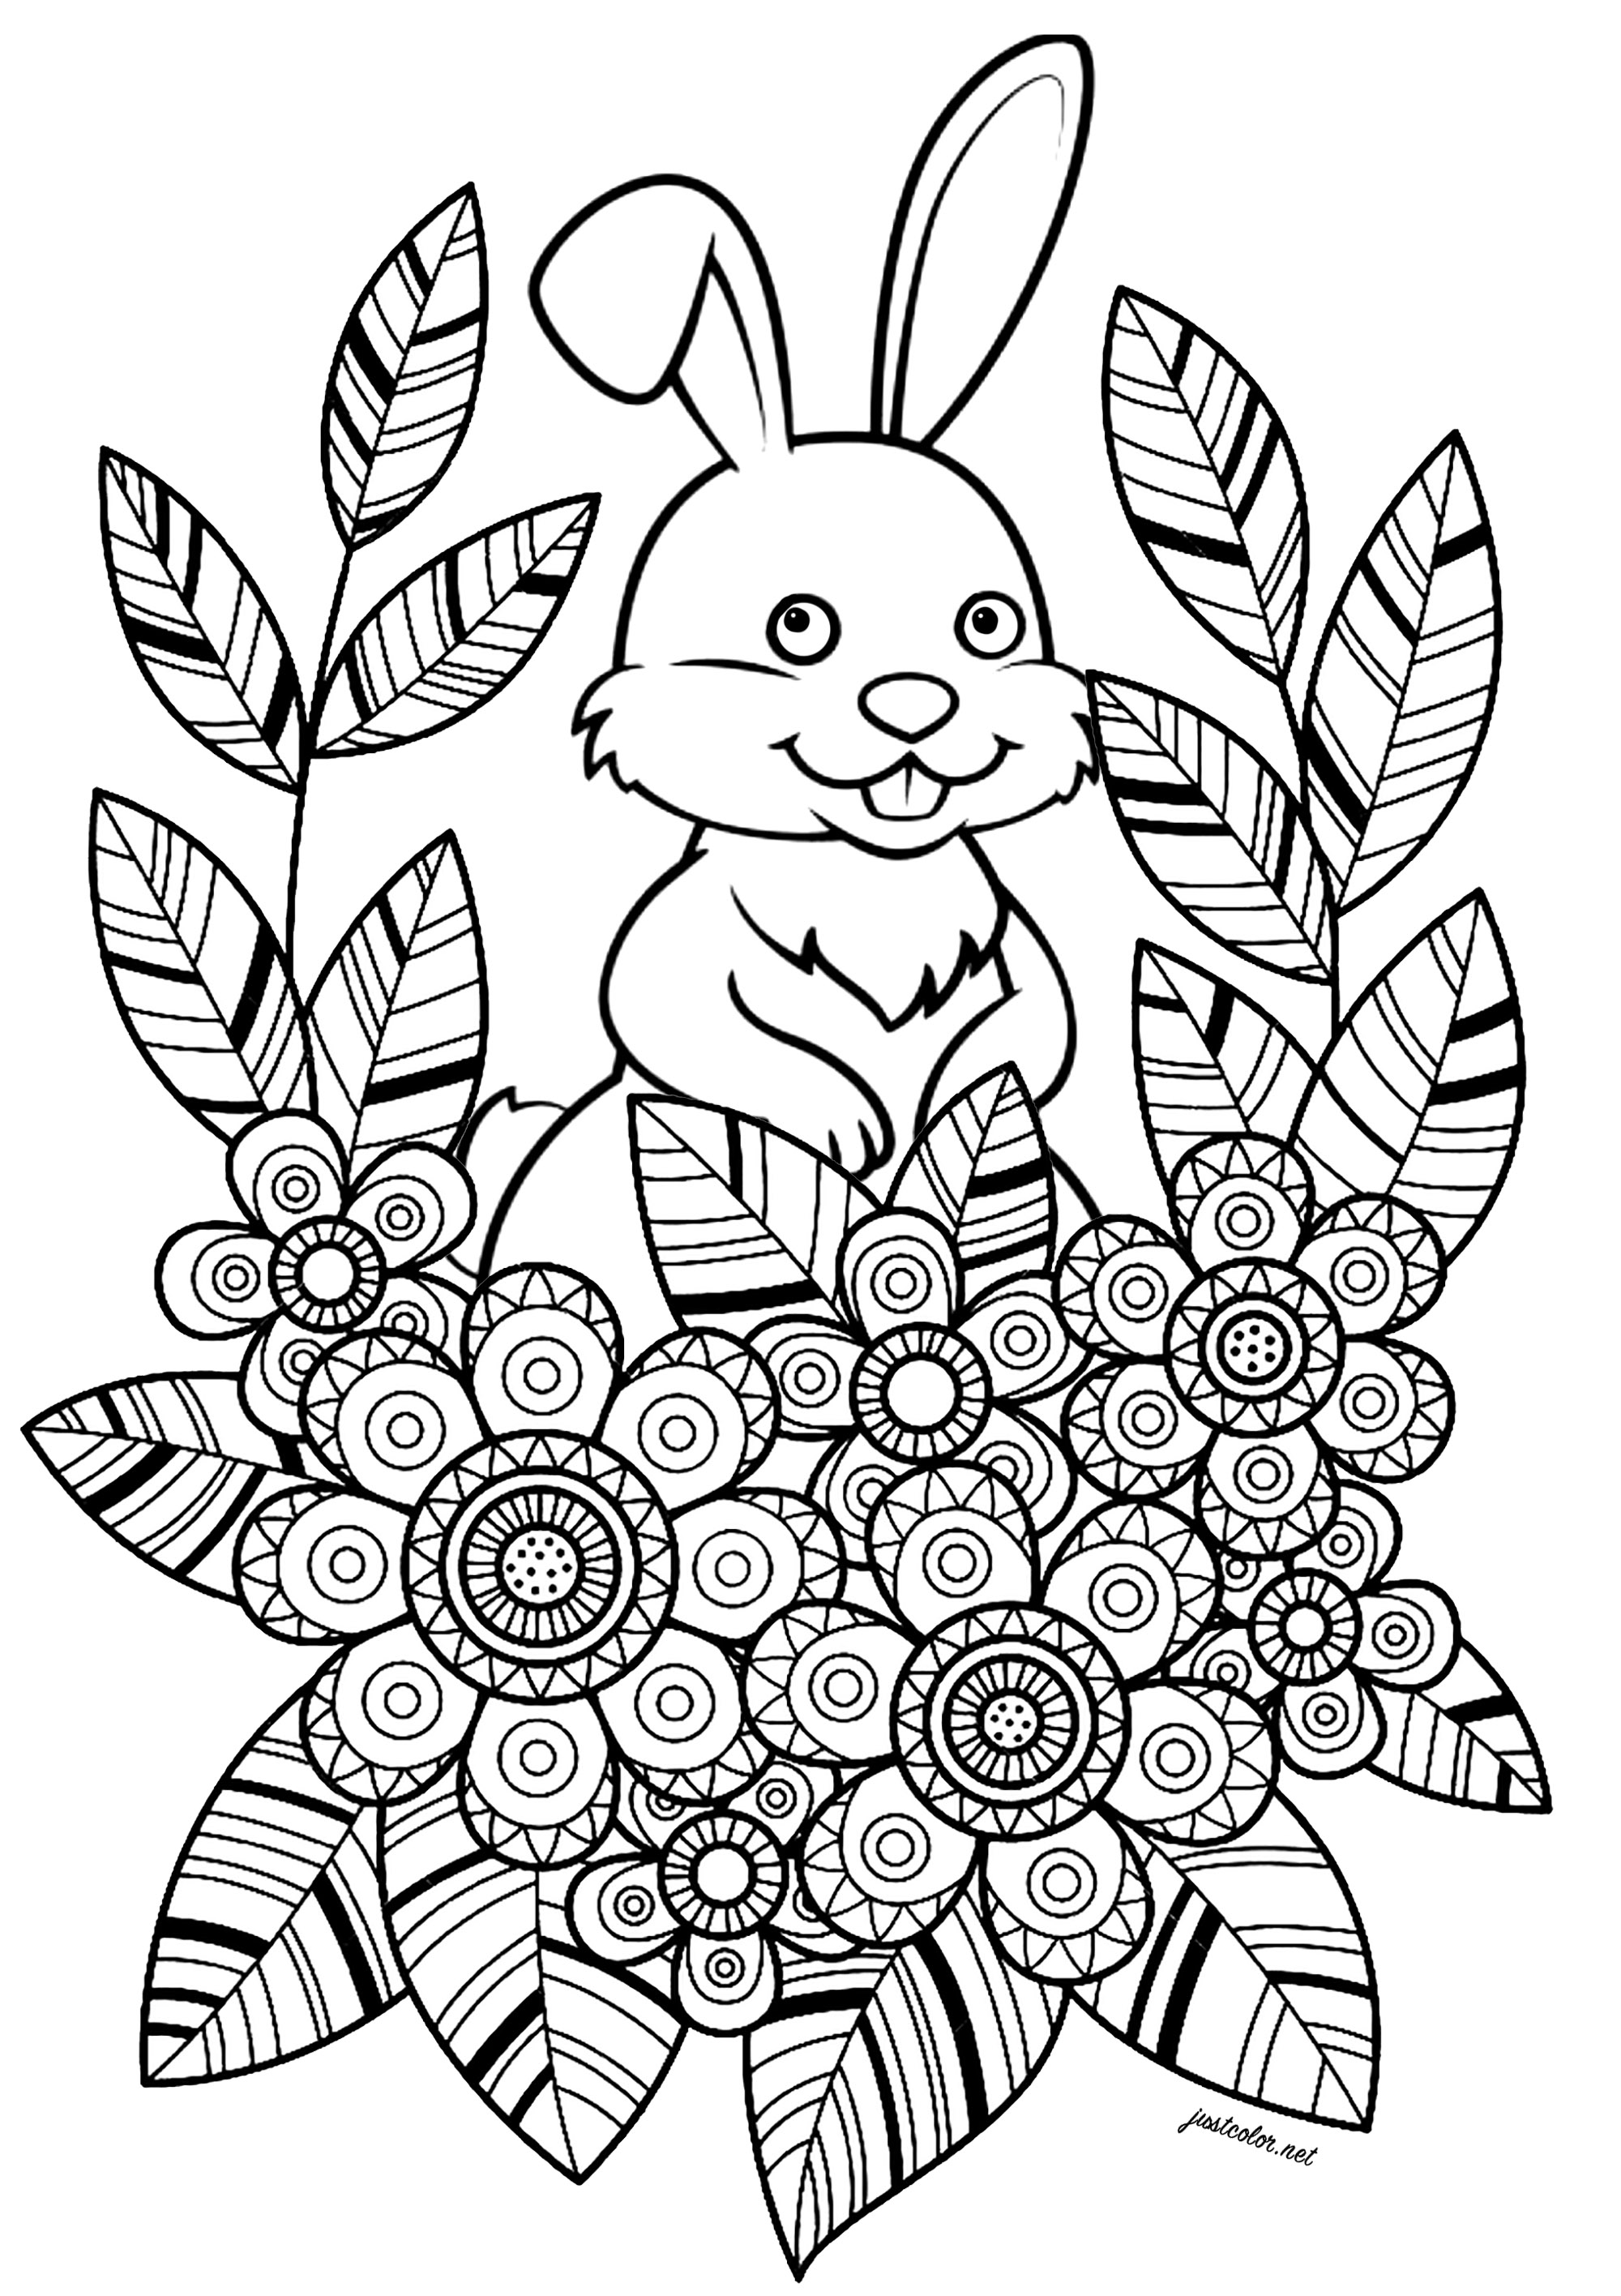 Rabbit with flowers and leaves with nice patterns. This simple and charming coloring page features a white rabbit hiding behind flowers and leaves. The flowers and leaves are drawn in a very coloring-friendly style, with well-defined areas and pretty patterns